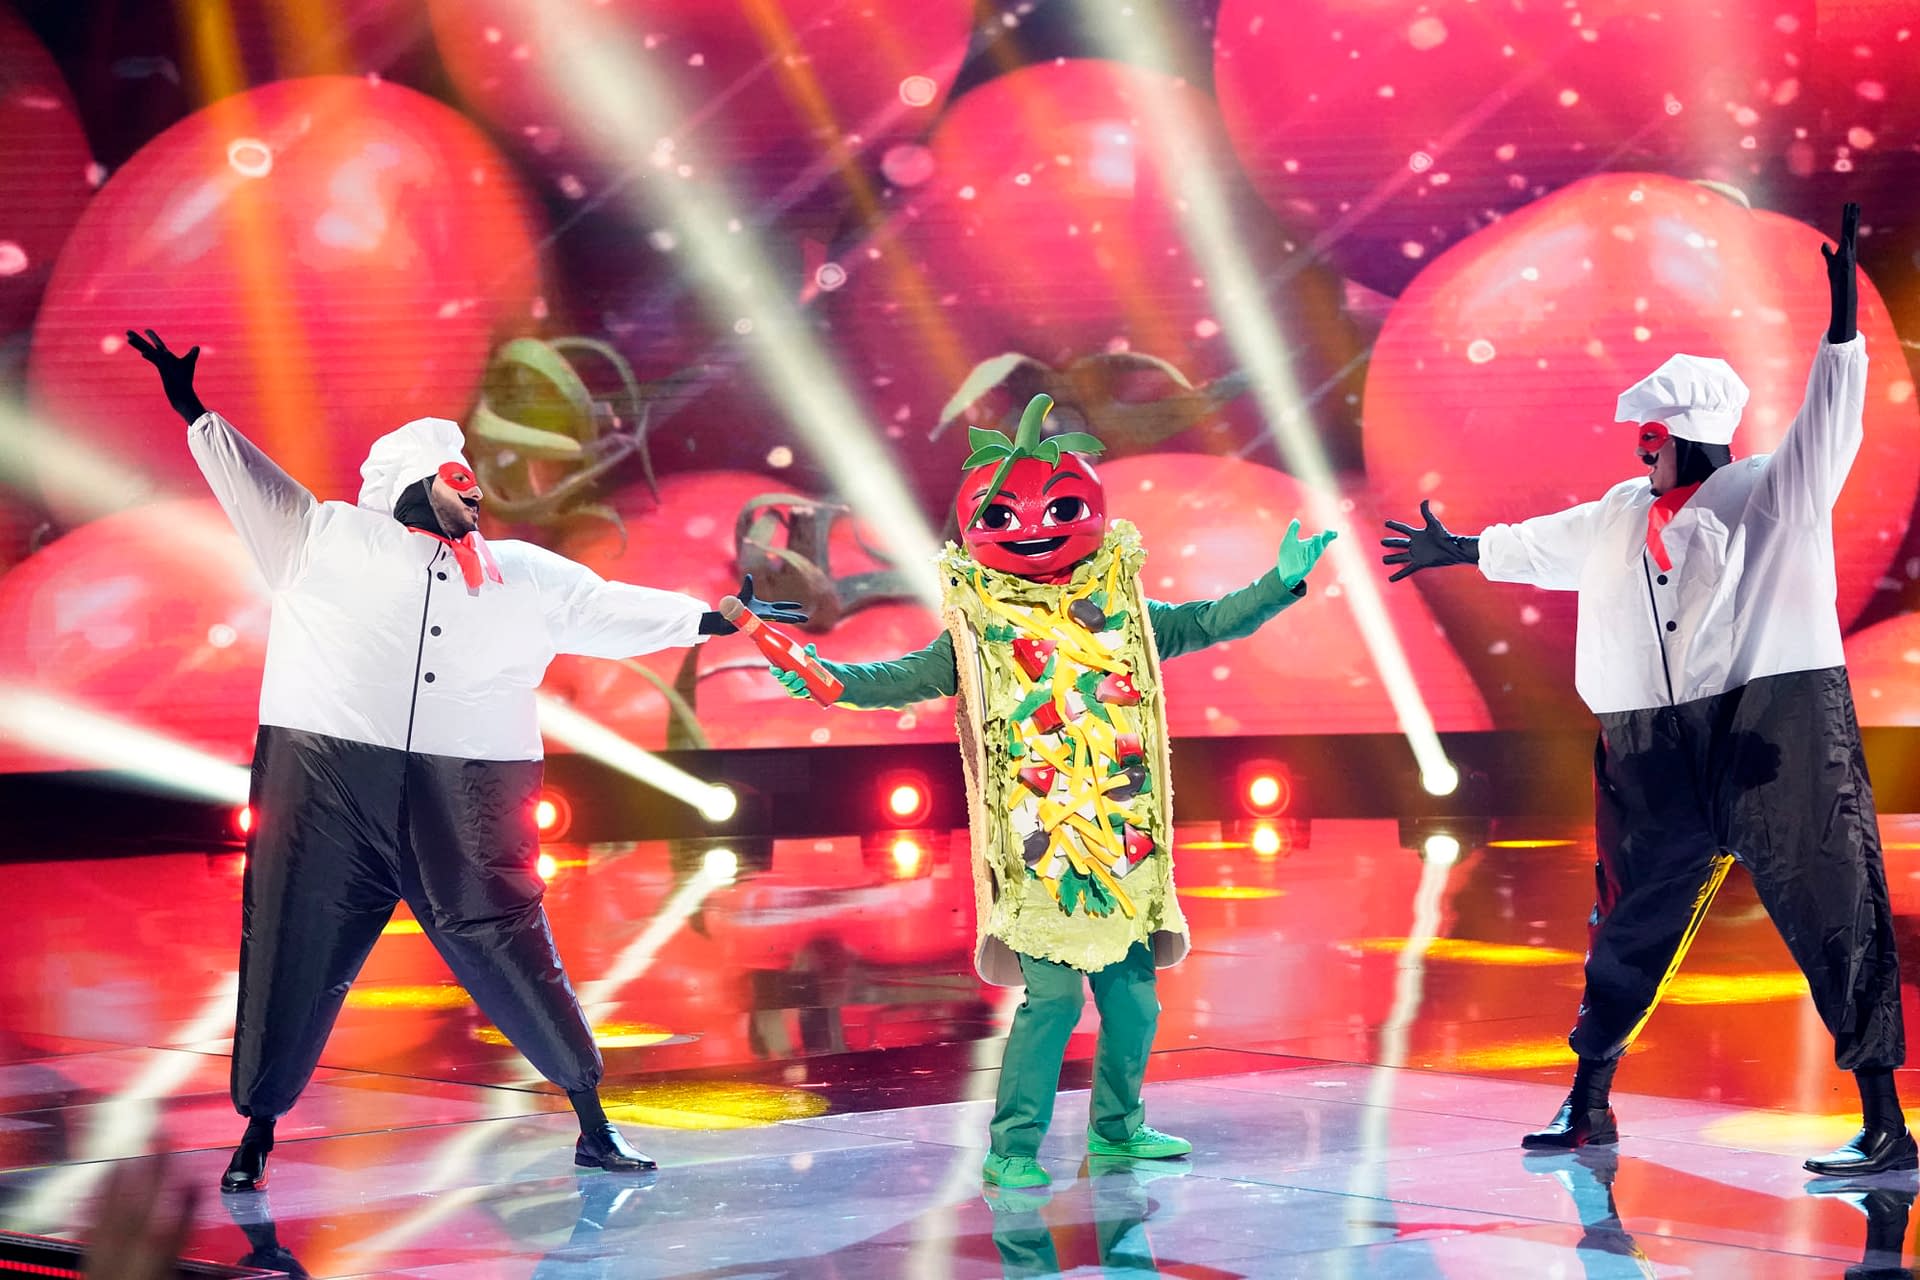 "The Masked Singer" Season 3 "Friends in High Places: Group B Championships" Ready to Bring the T-Pain [PREVIEW]